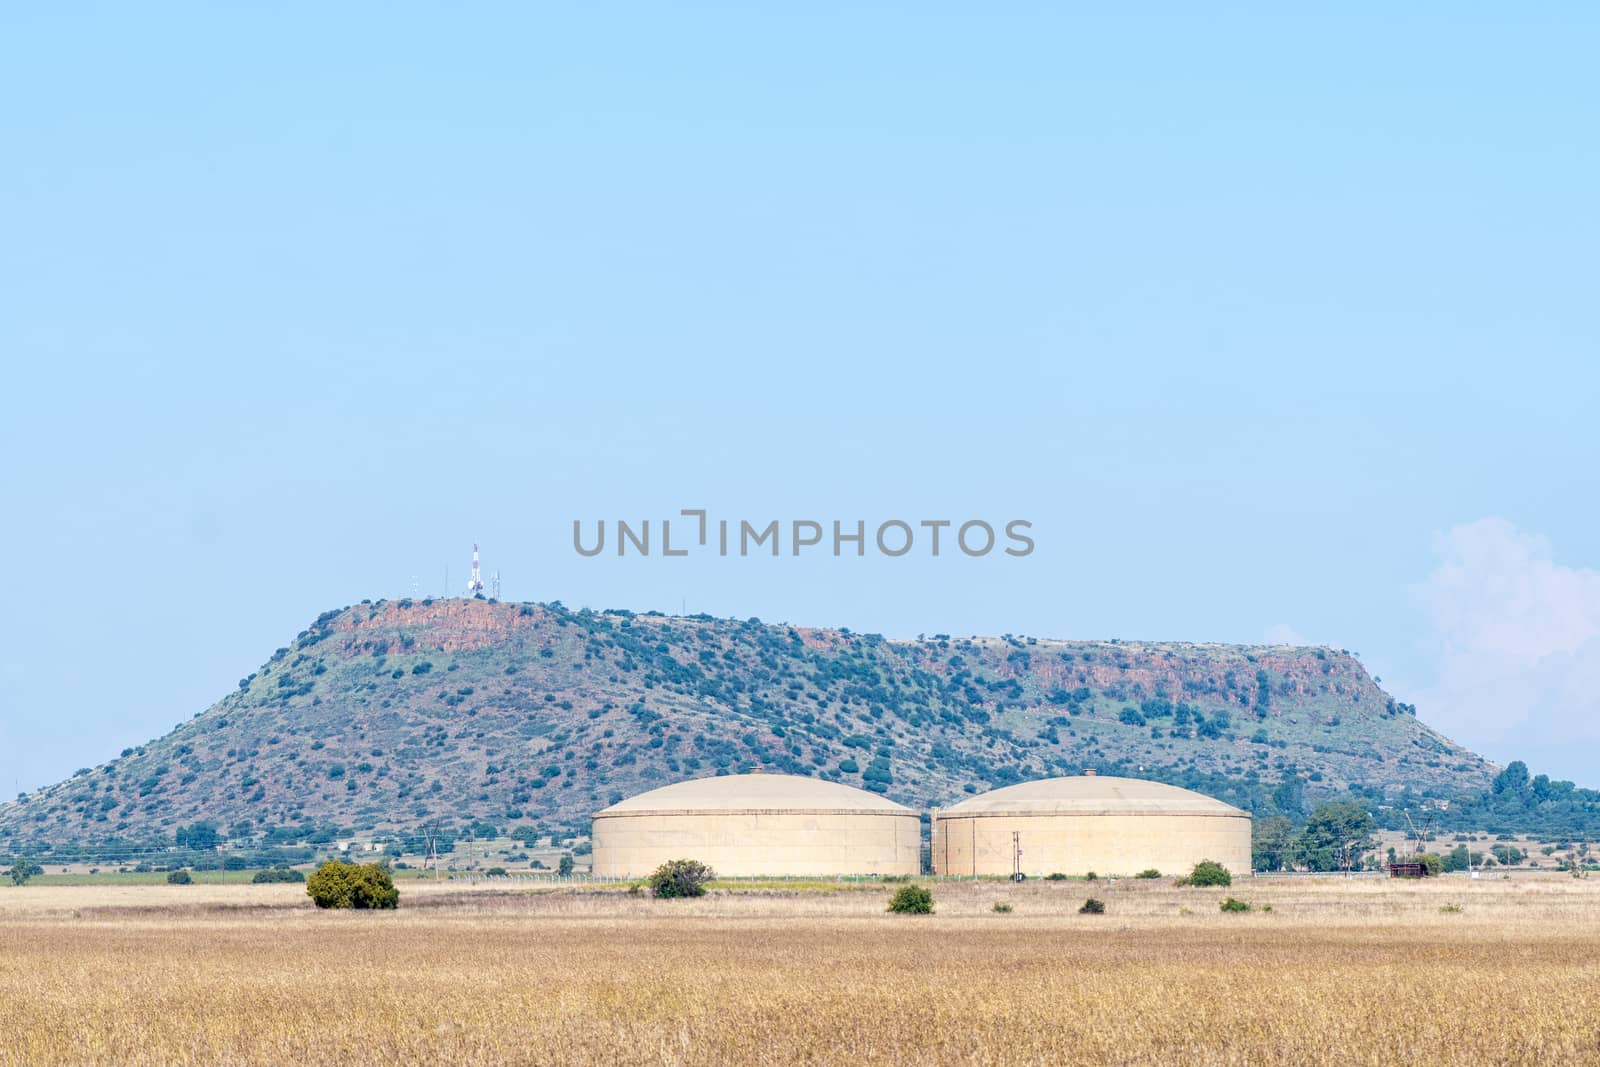 Water reservoirs at the Beatrix mine near Welkom in the Free State Province. Telecommunications infrastructure are visible on a hill